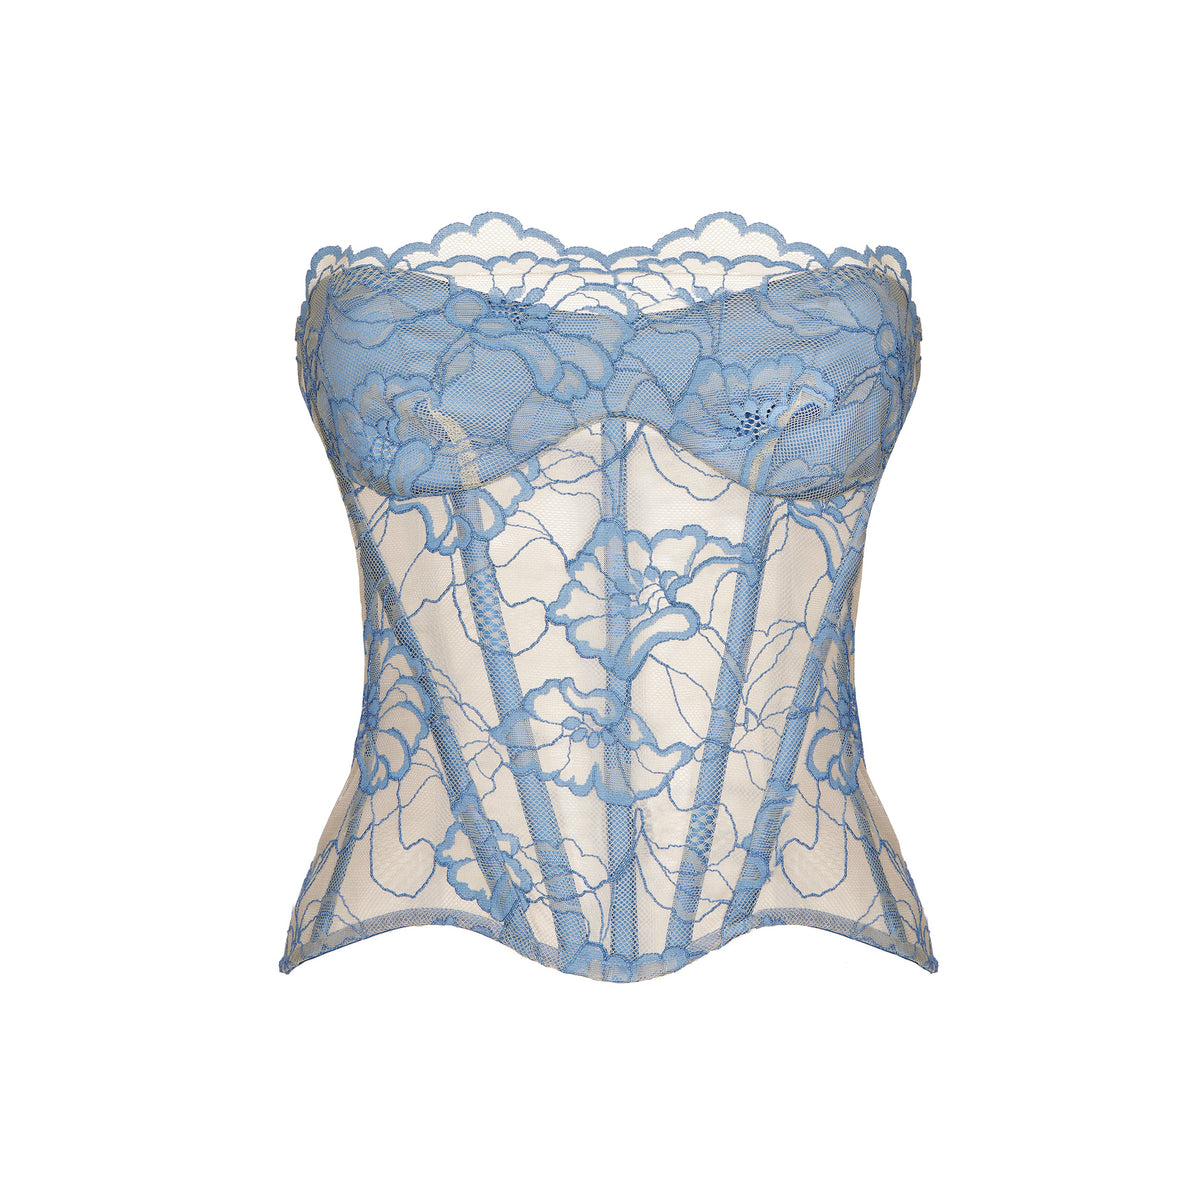 Lace corset top Blue RC23S001A027 - buy at the online boutique RozieCorsets